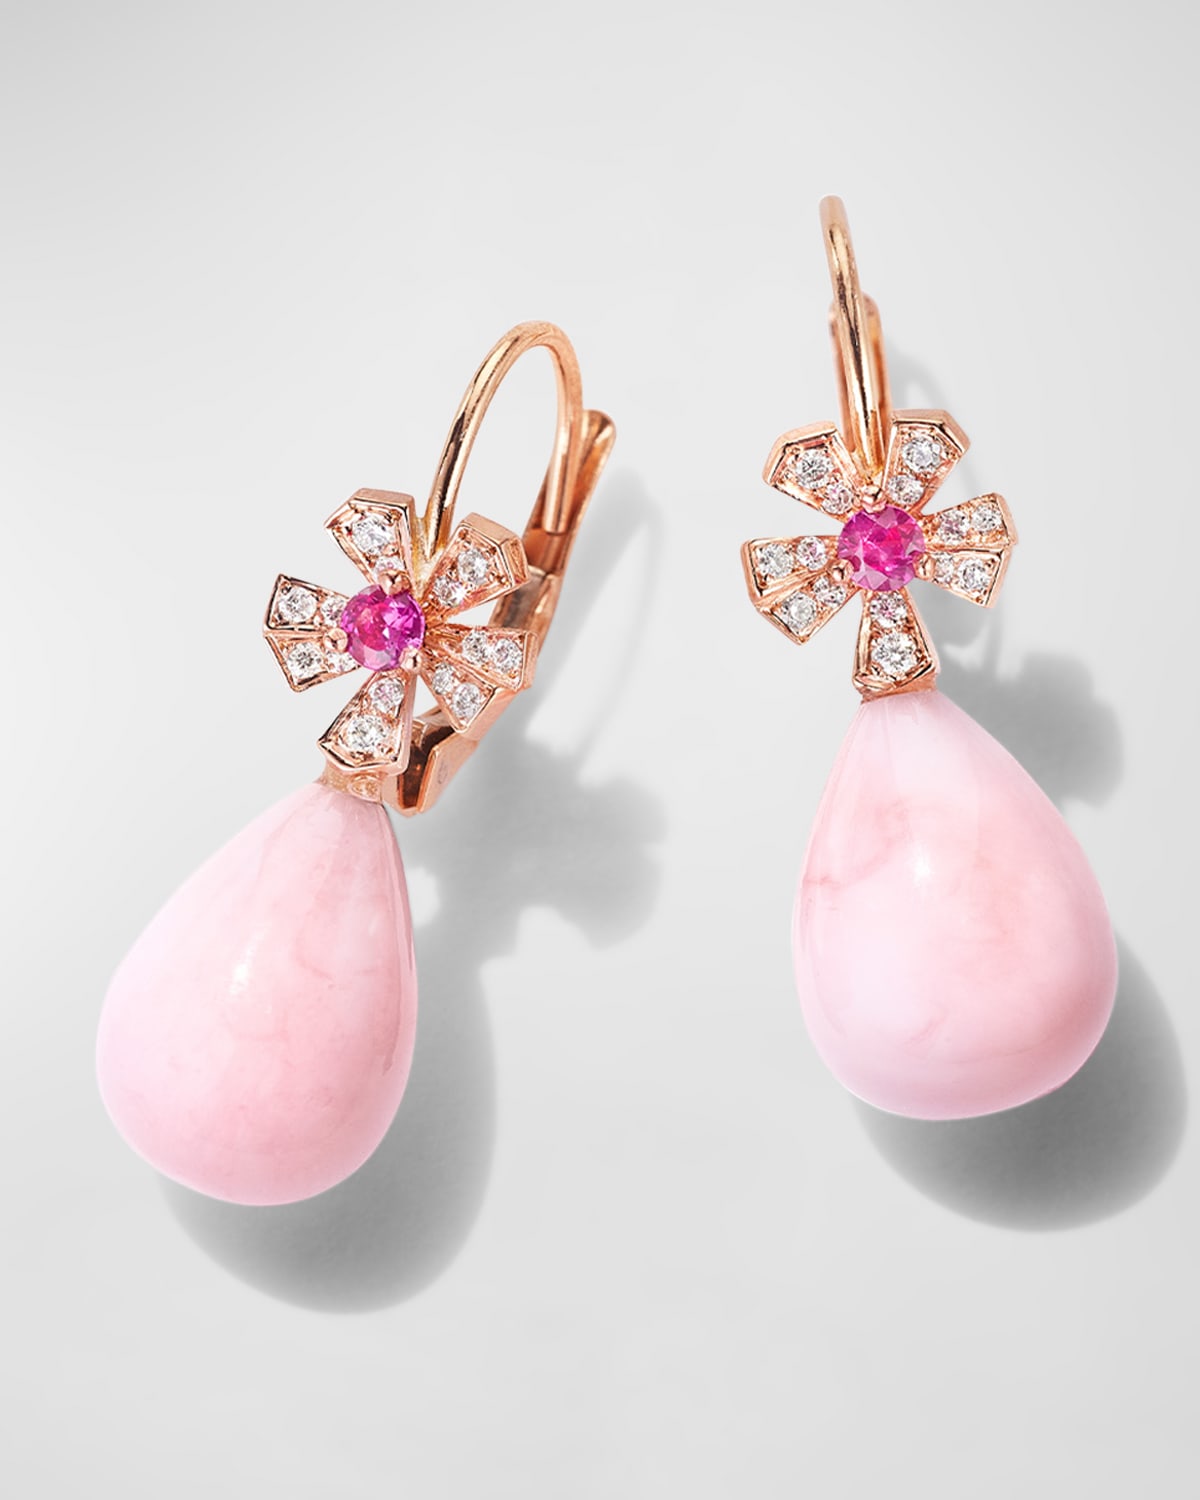 18K Rose Gold Wonderland Earrings with Pink Sapphires, Pave Diamonds and Pink Opal Drops